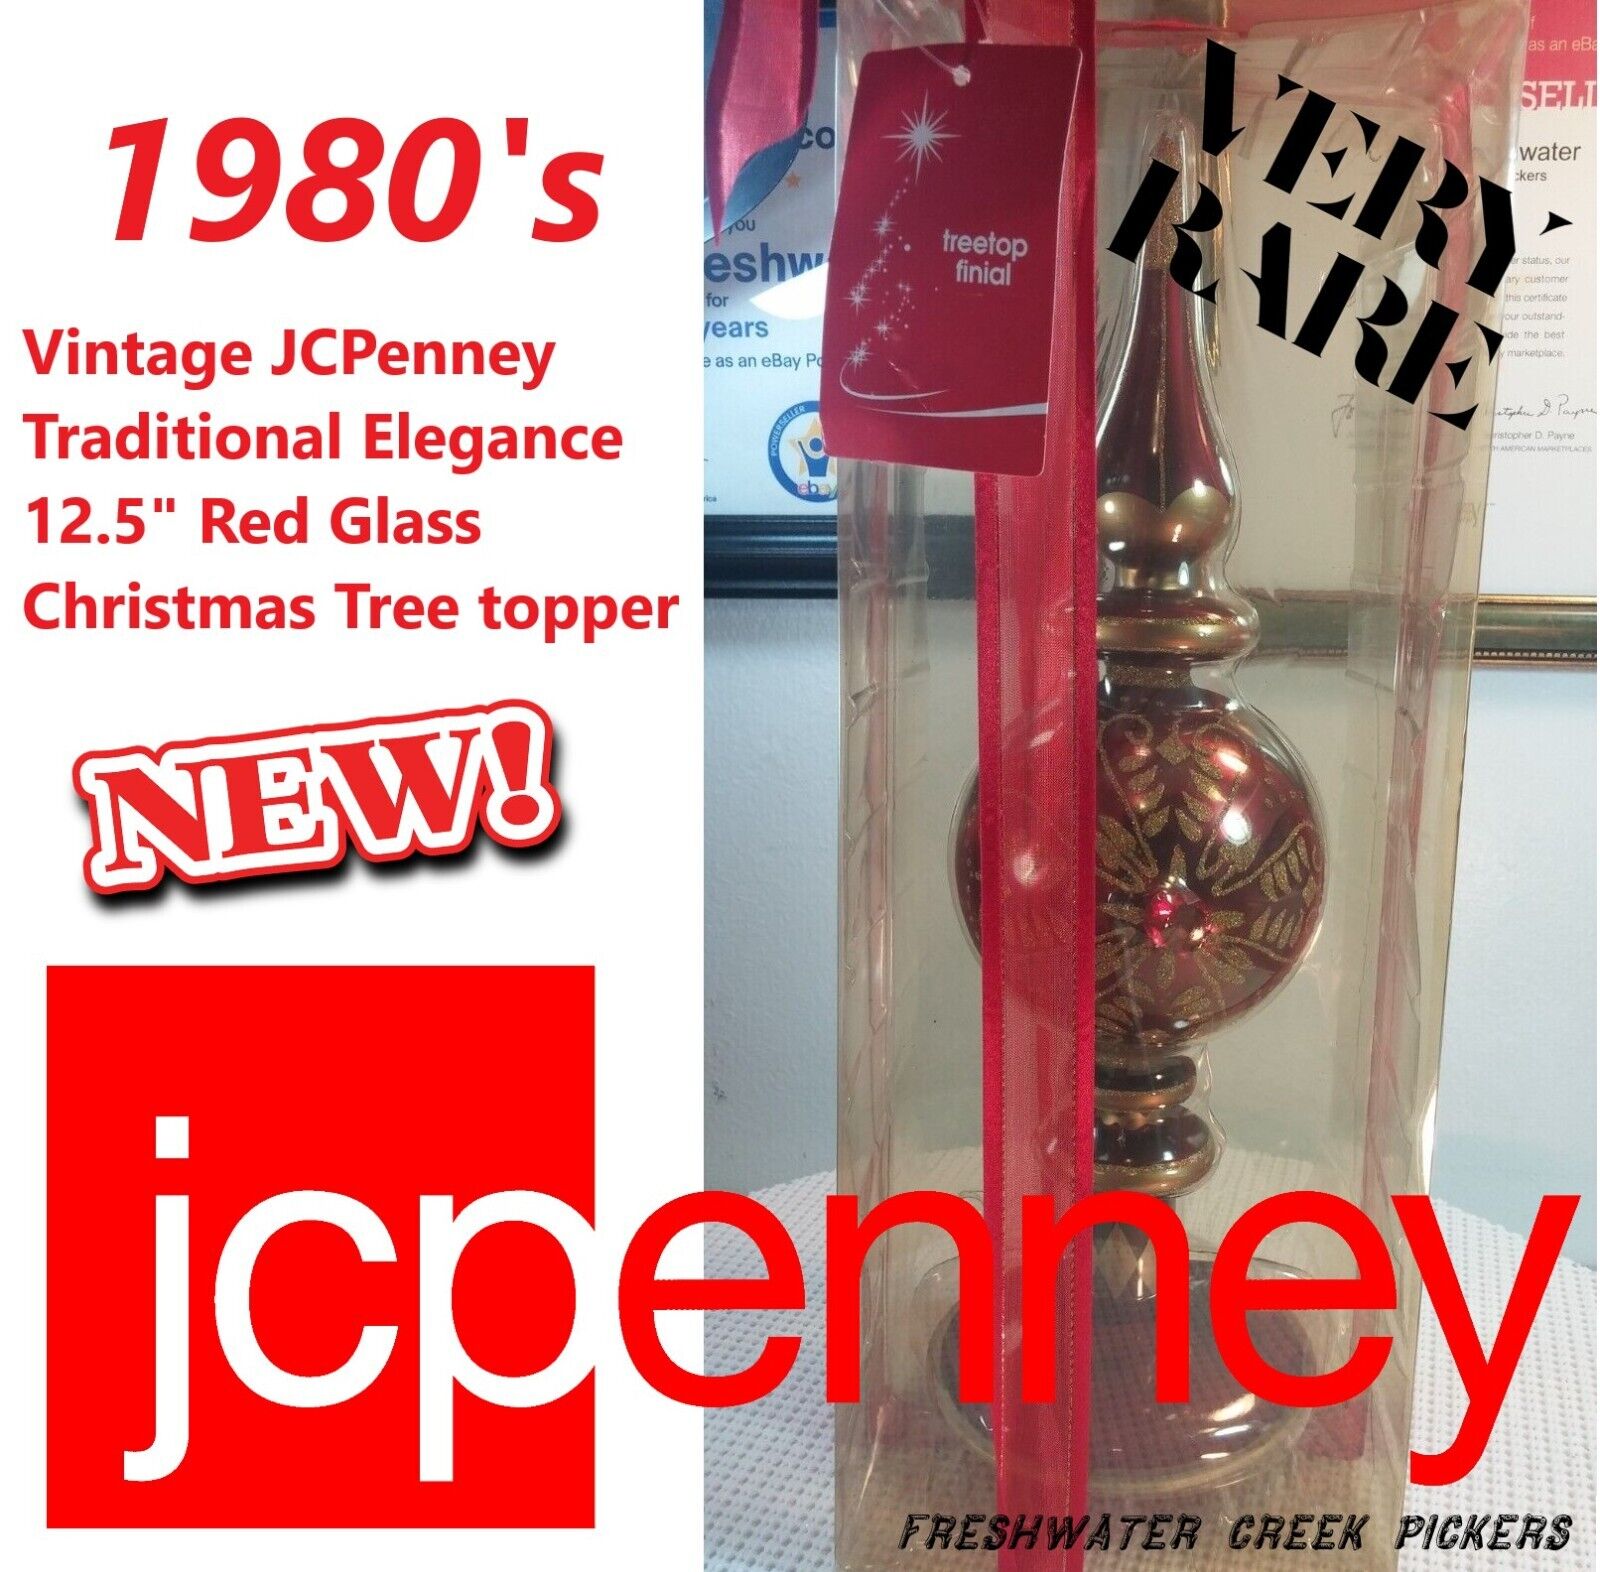 NEW Vintage JCPenney Traditional Elegance 12.5